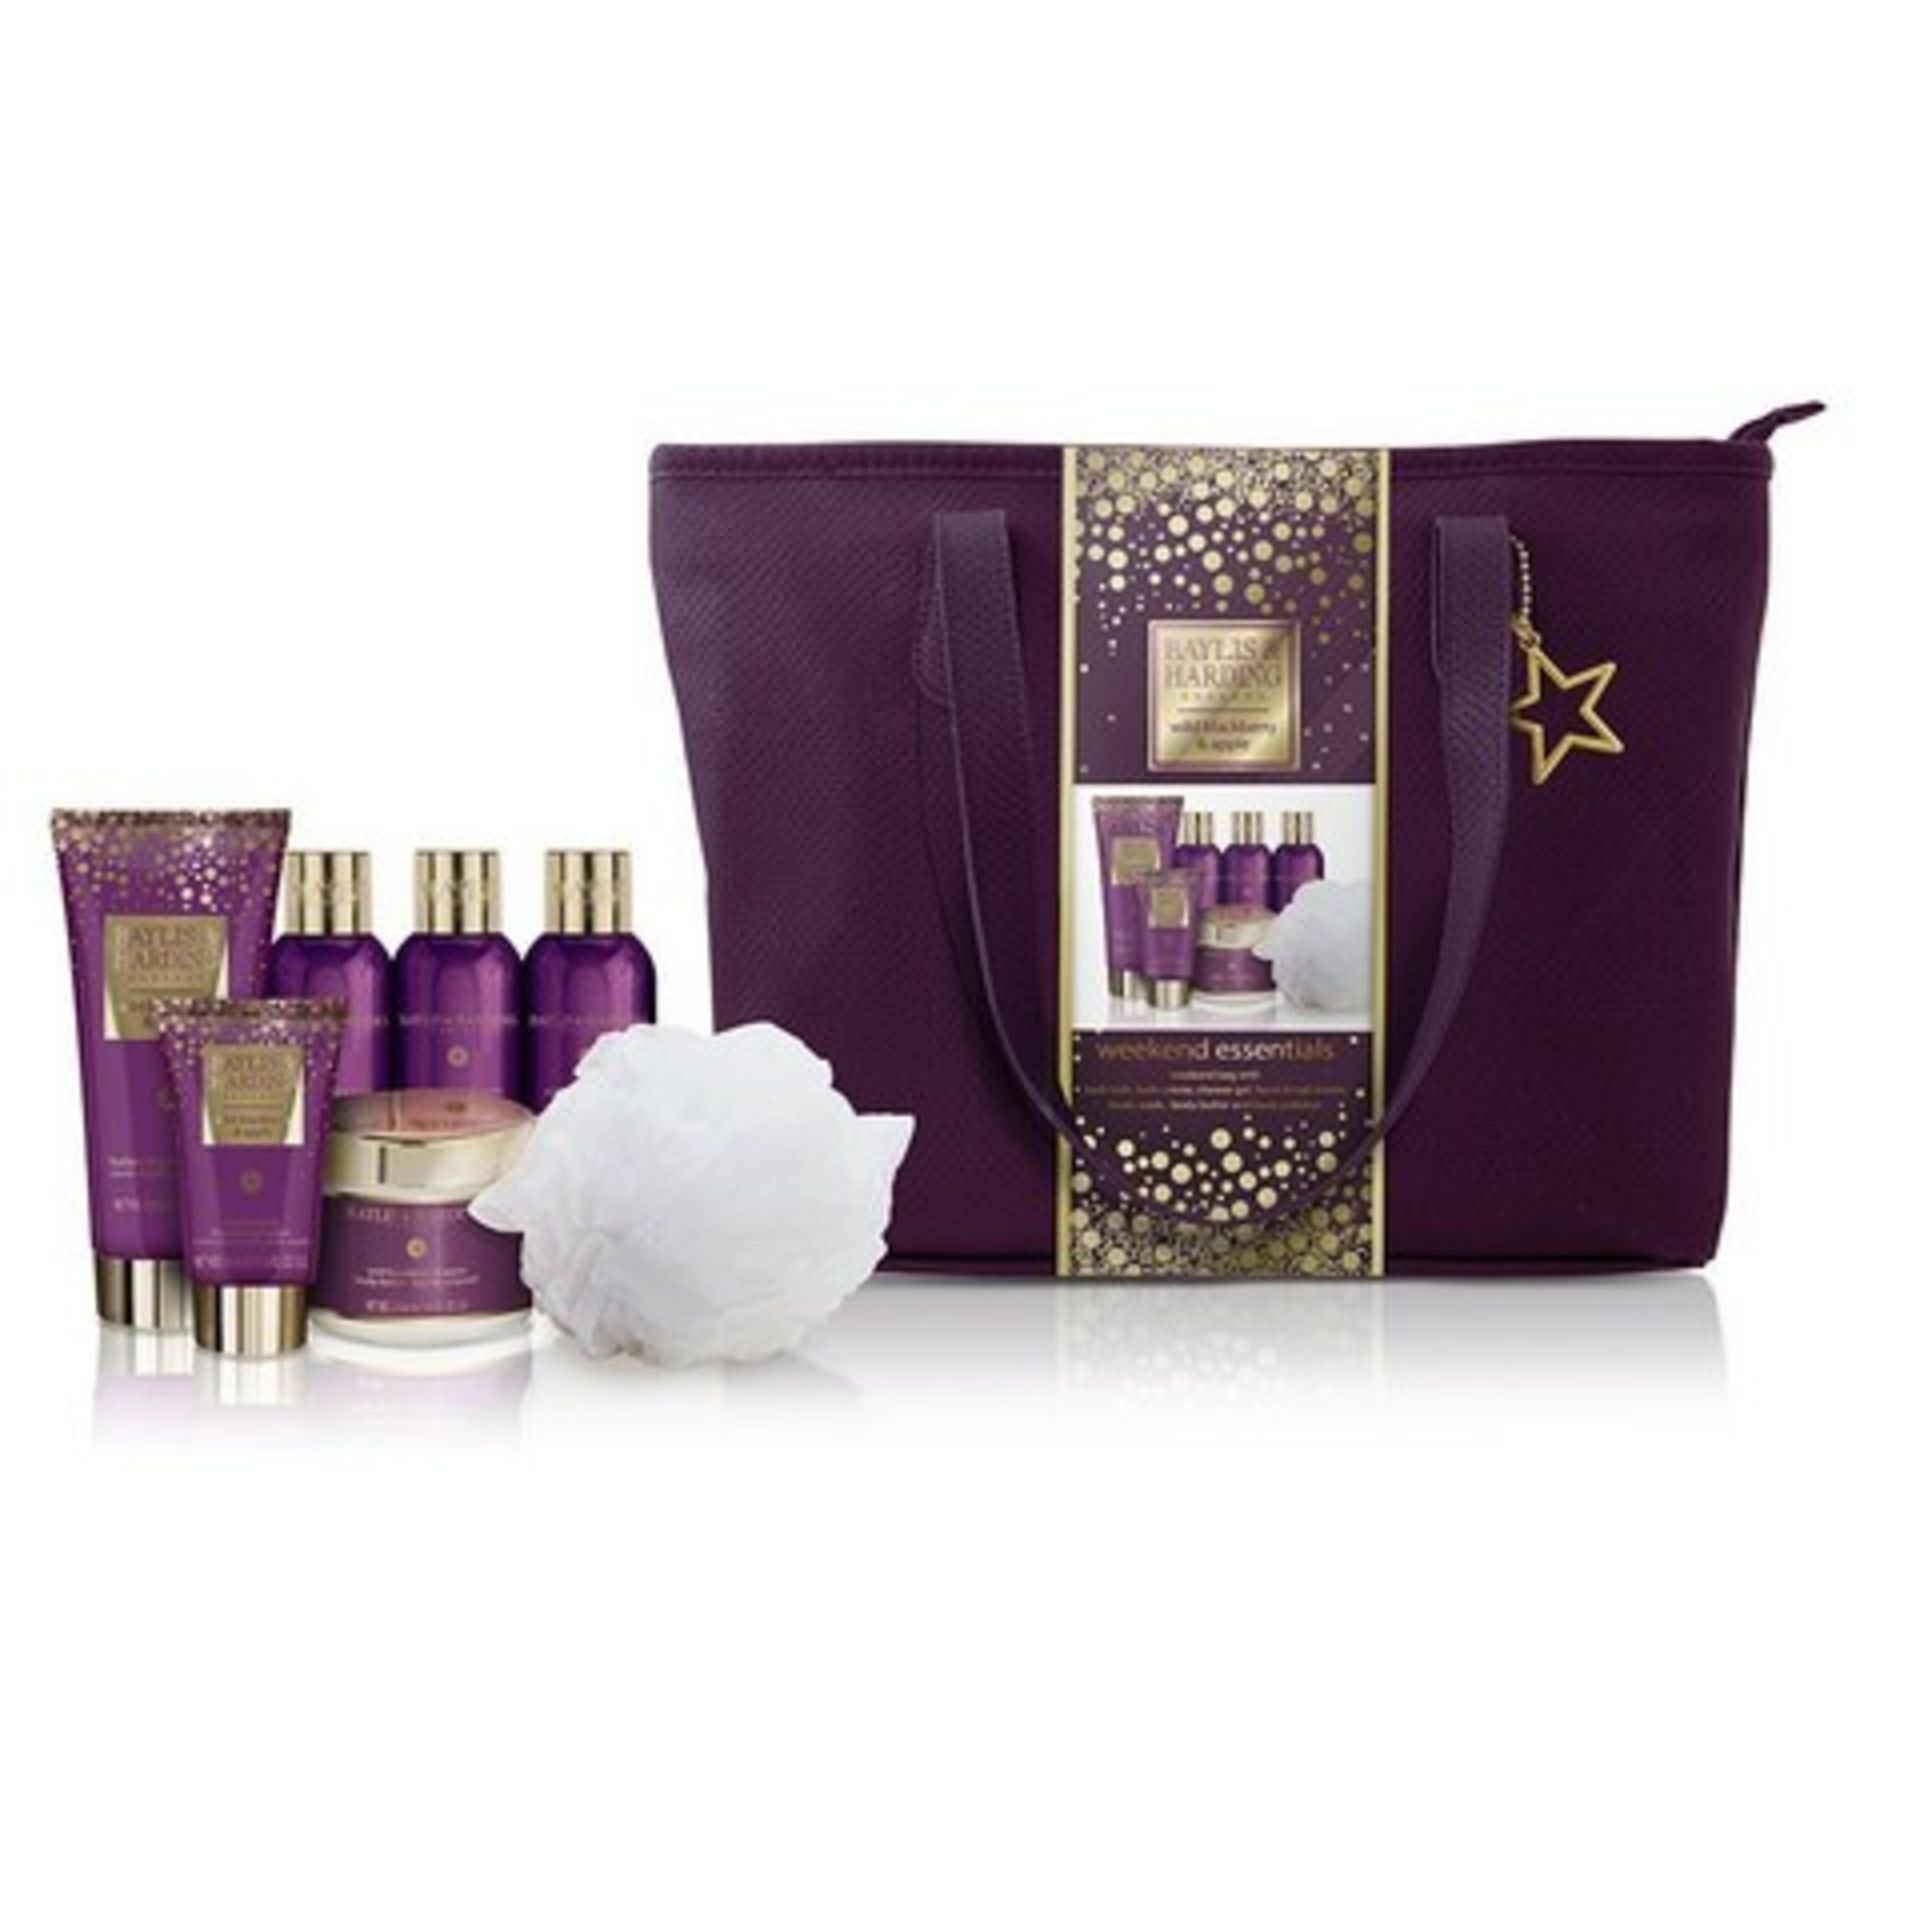 V Brand New Baylis & Harding Wild Blackberry and Apple Relax and Retreat Weekend Bag Including 200ml